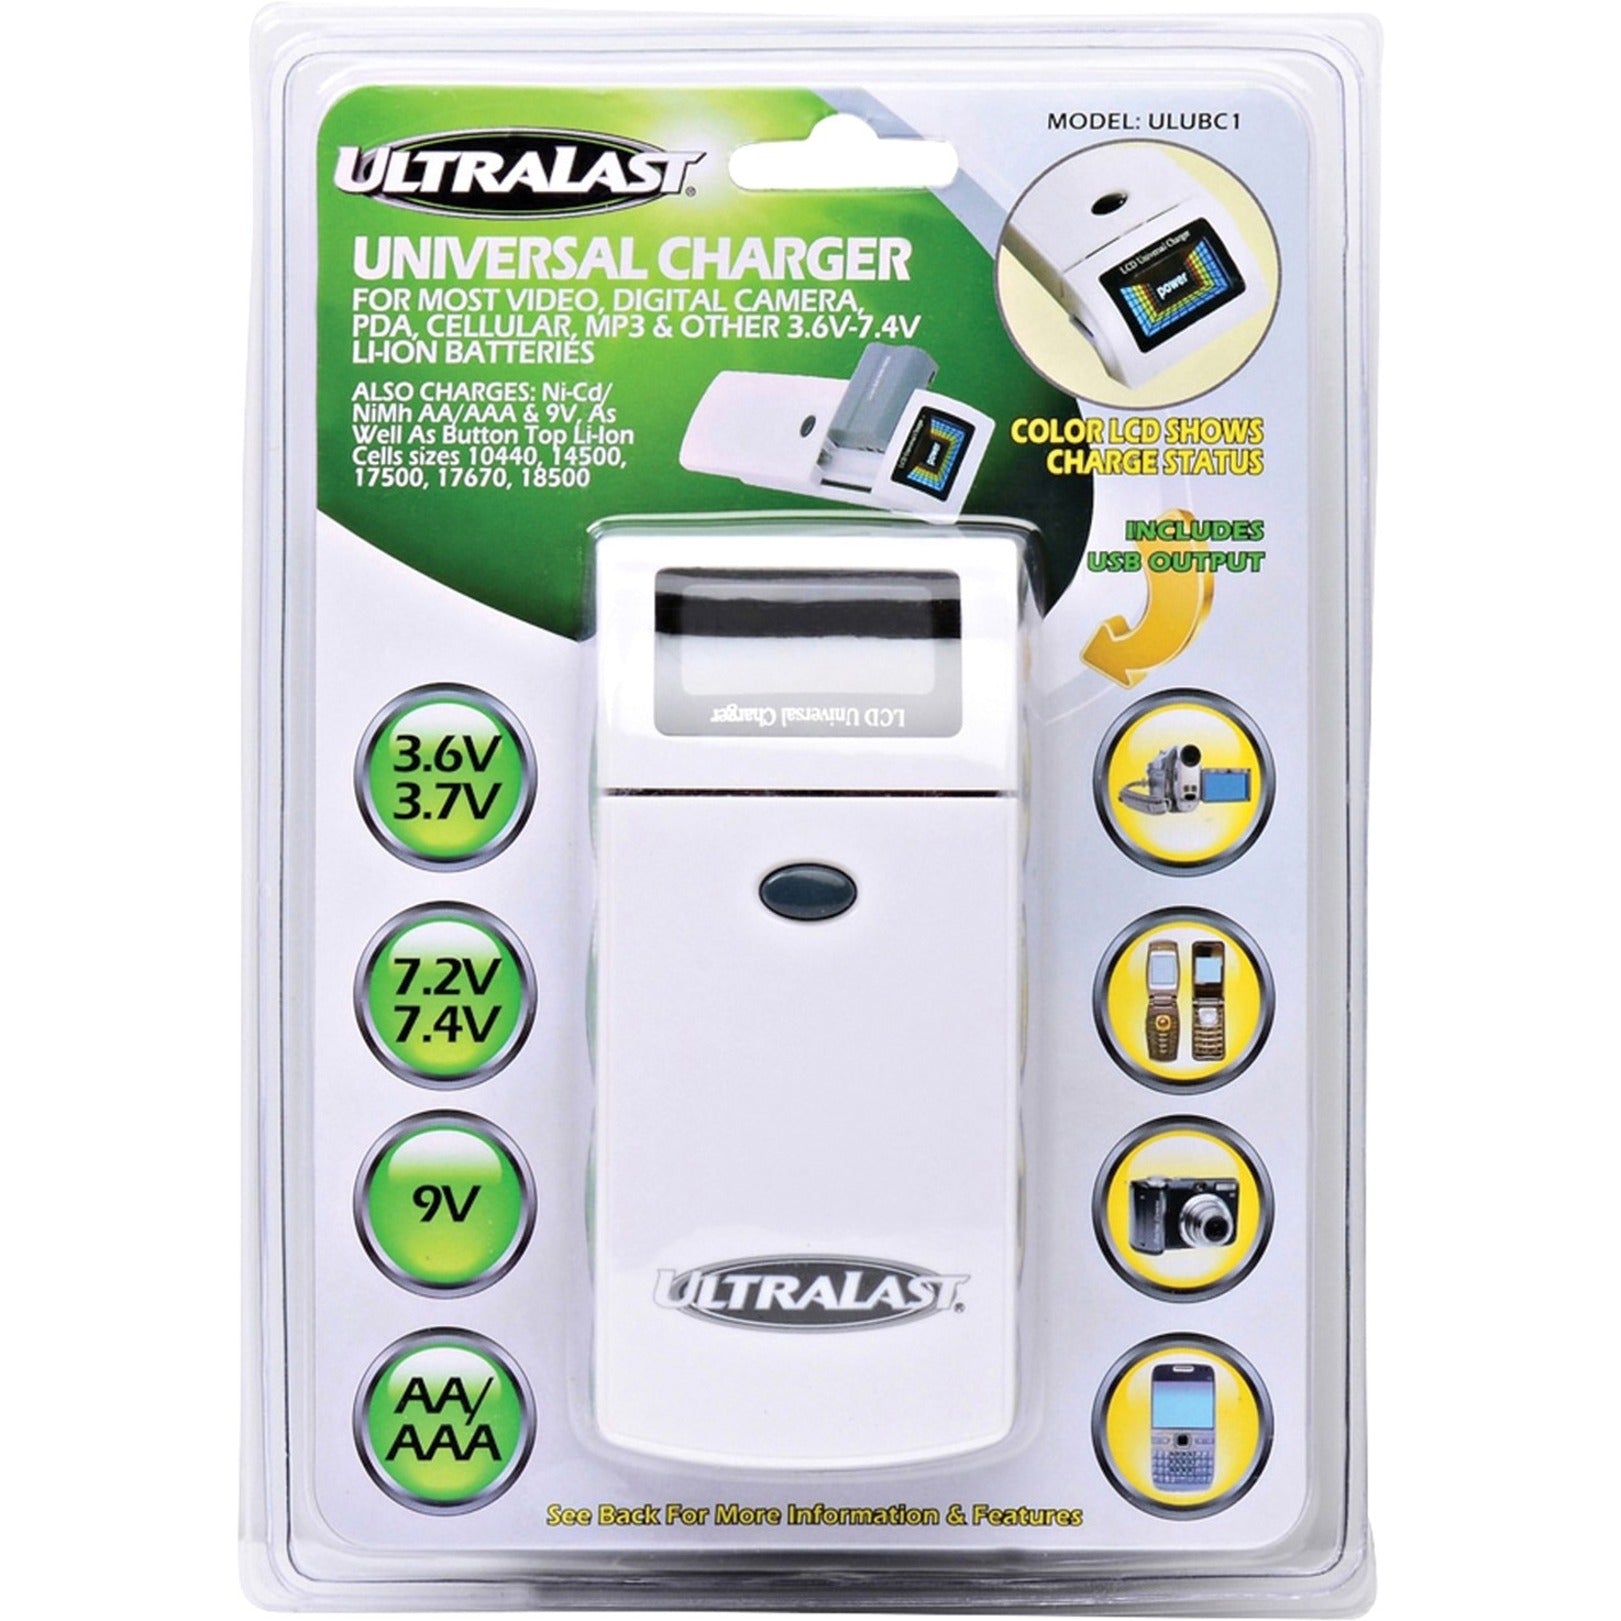 Ultralast Universal Battery Charger - Fast Charging for Li-Ion, Ni-Cd, and Ni-Mh Batteries [Discontinued]